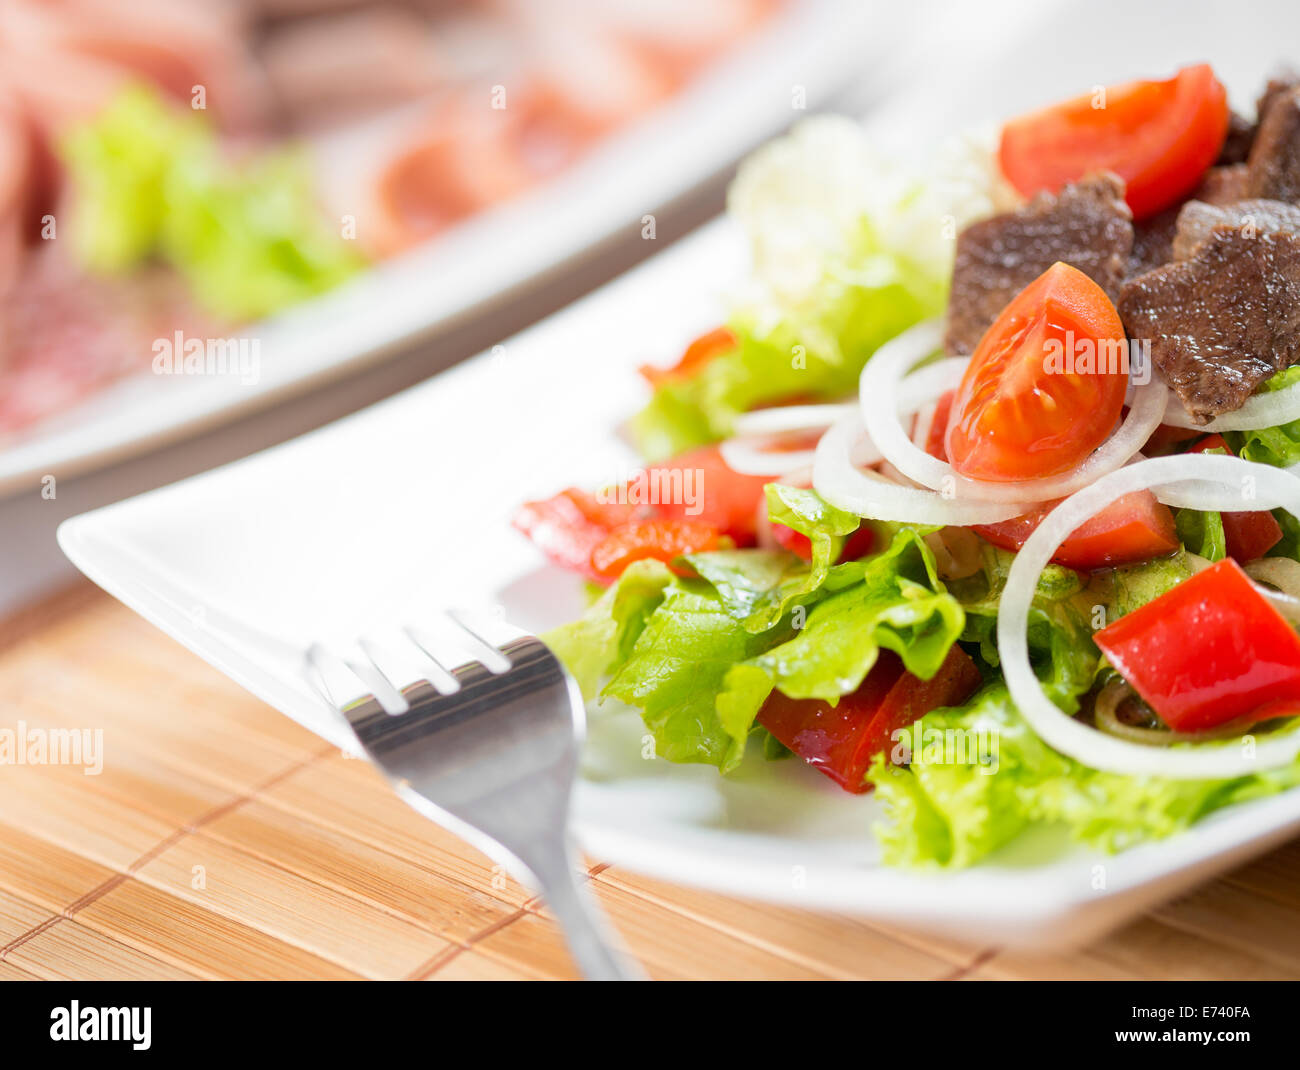 Vegetable salad with beef meat dish Stock Photo